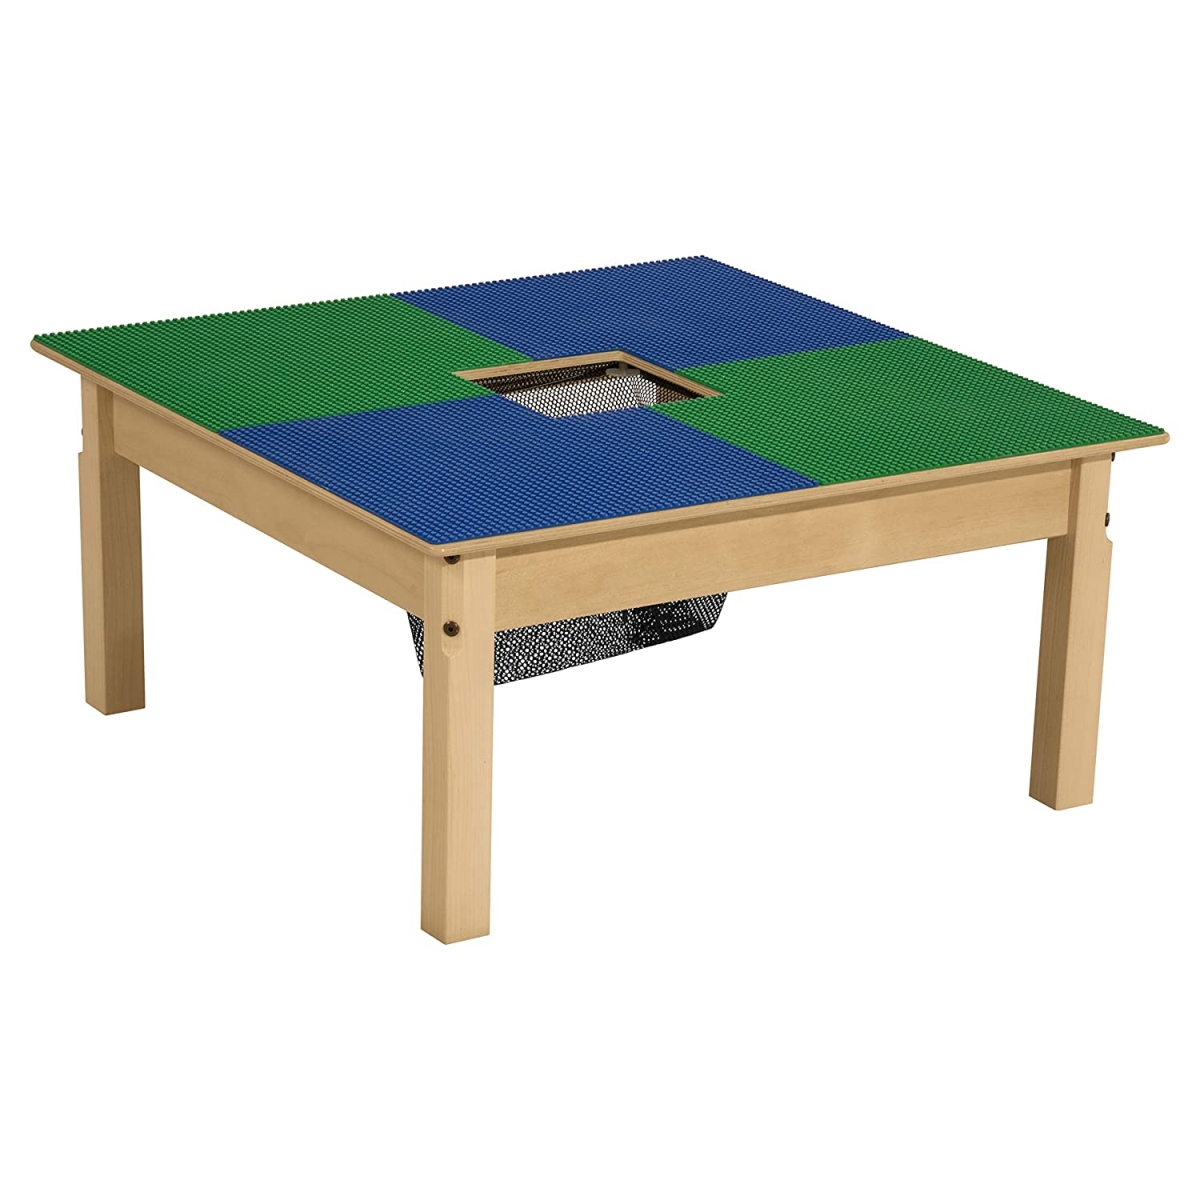 Tp3131sgn18-bg 18 In. Lego Compatible Table With Legs, Blue & Green - Square